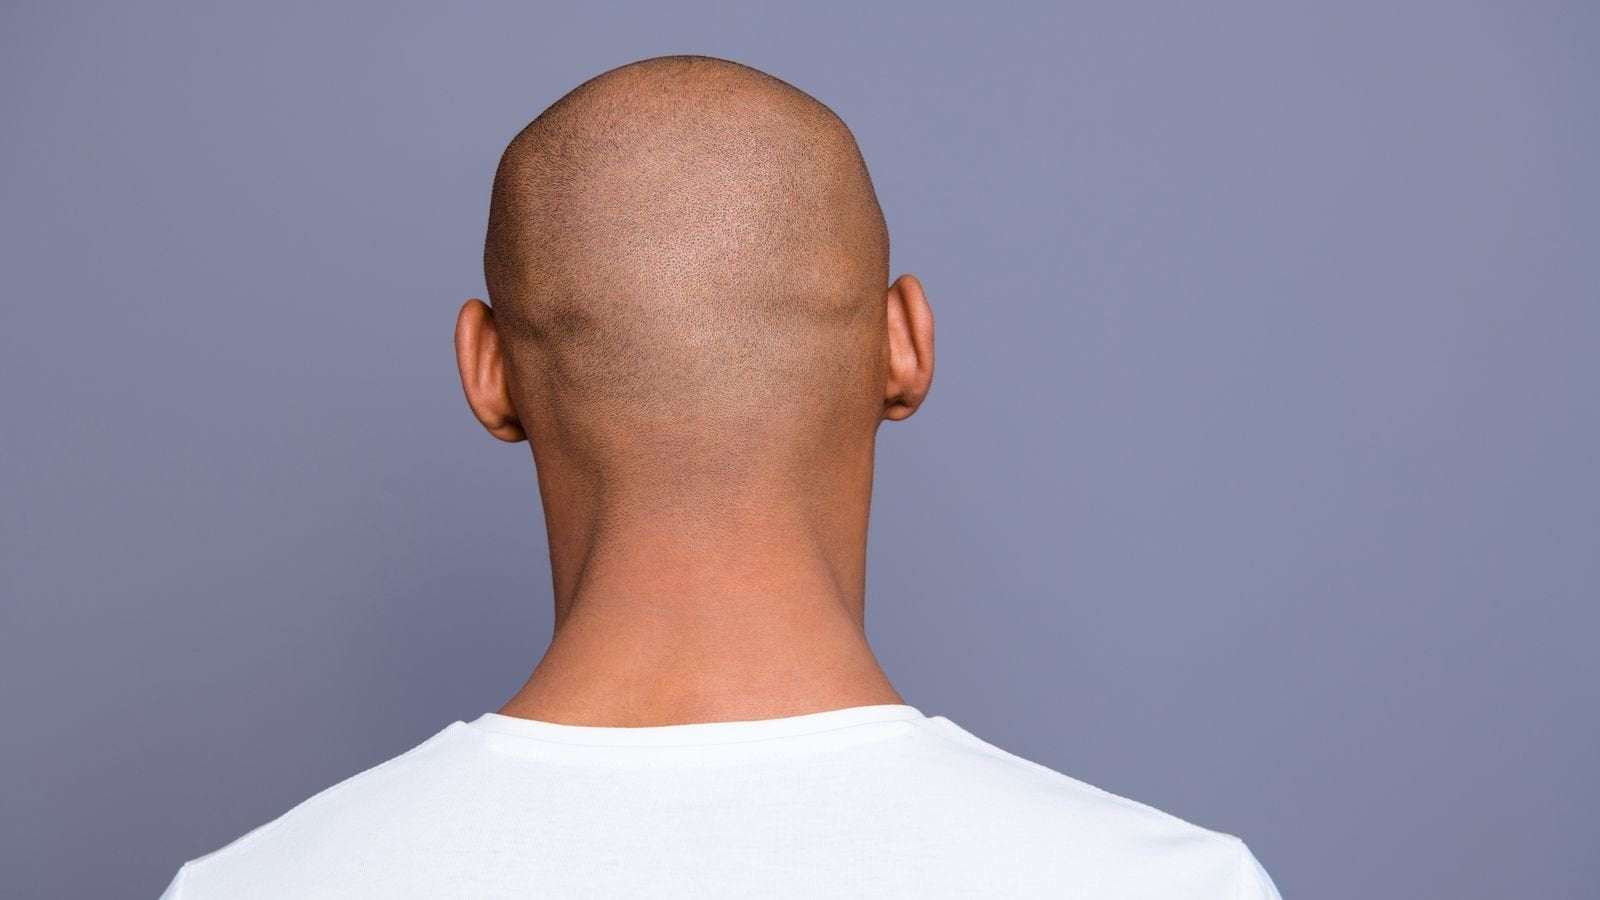 image for Calling a man bald is sexual harassment, employment tribunal rules